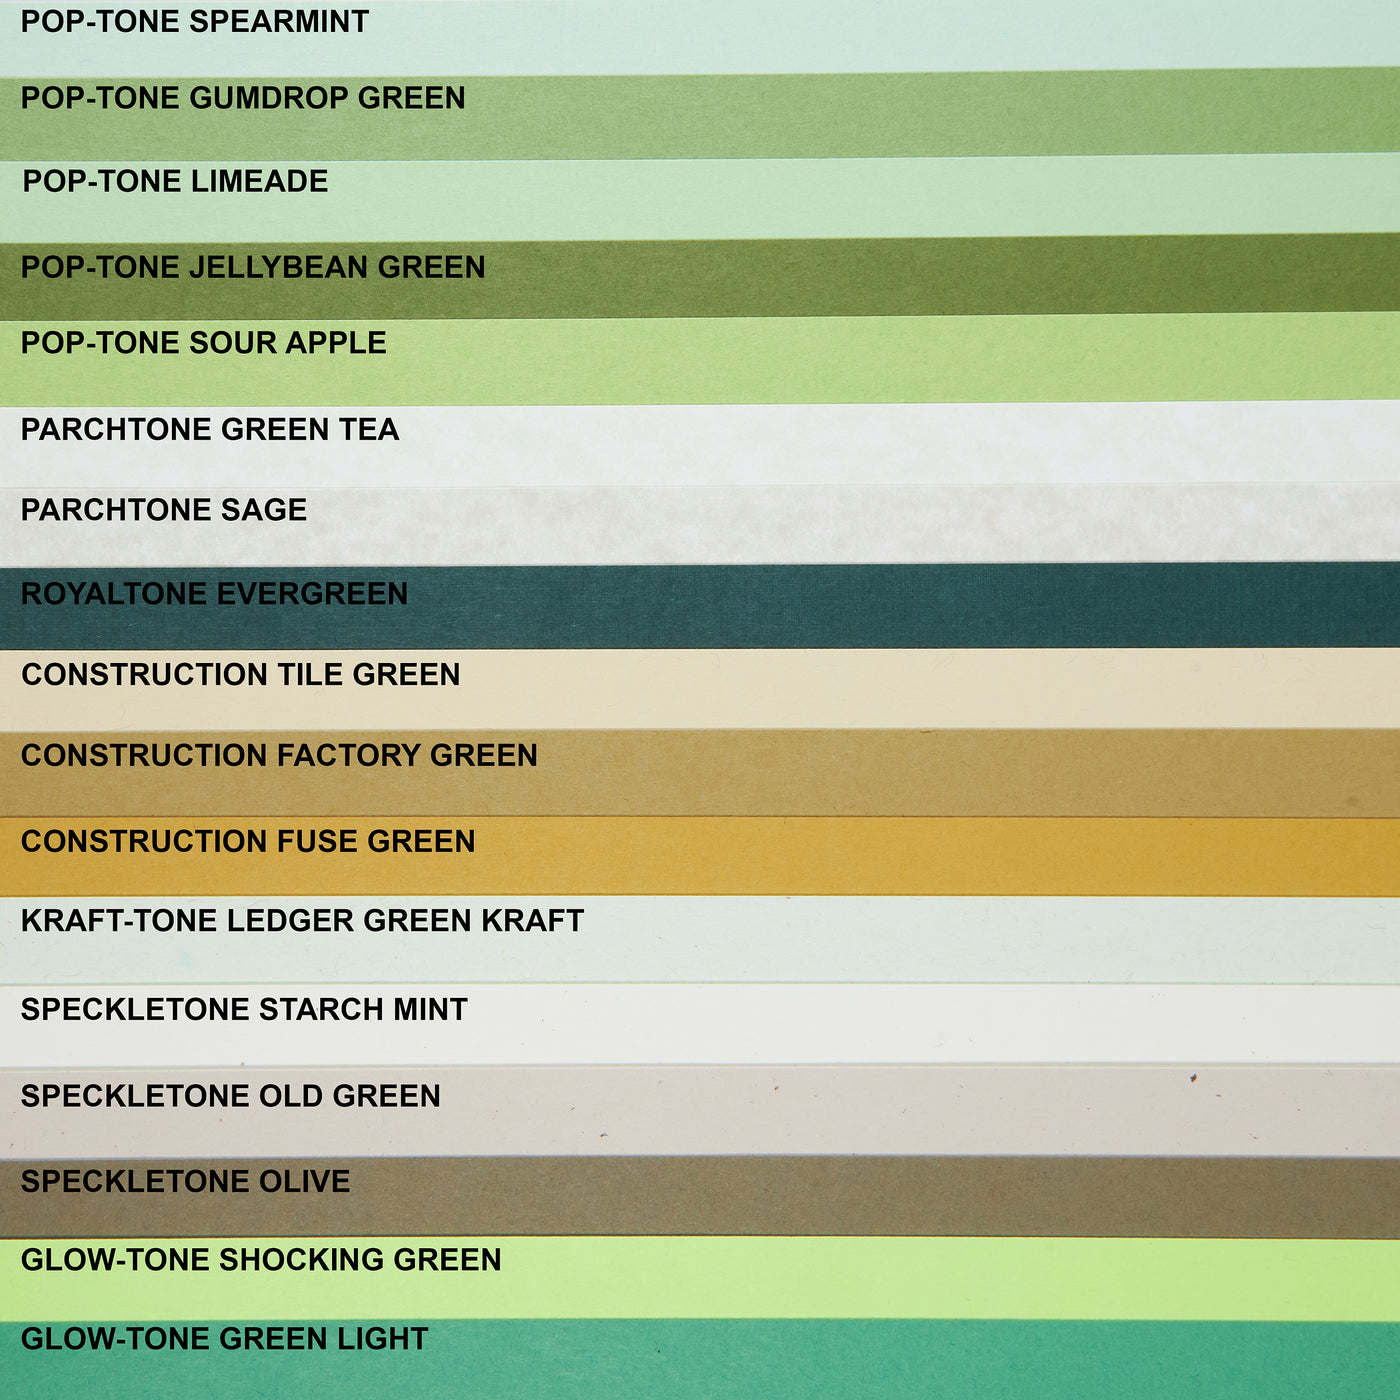 Florence • Cardstock Paper Texture Color Chart